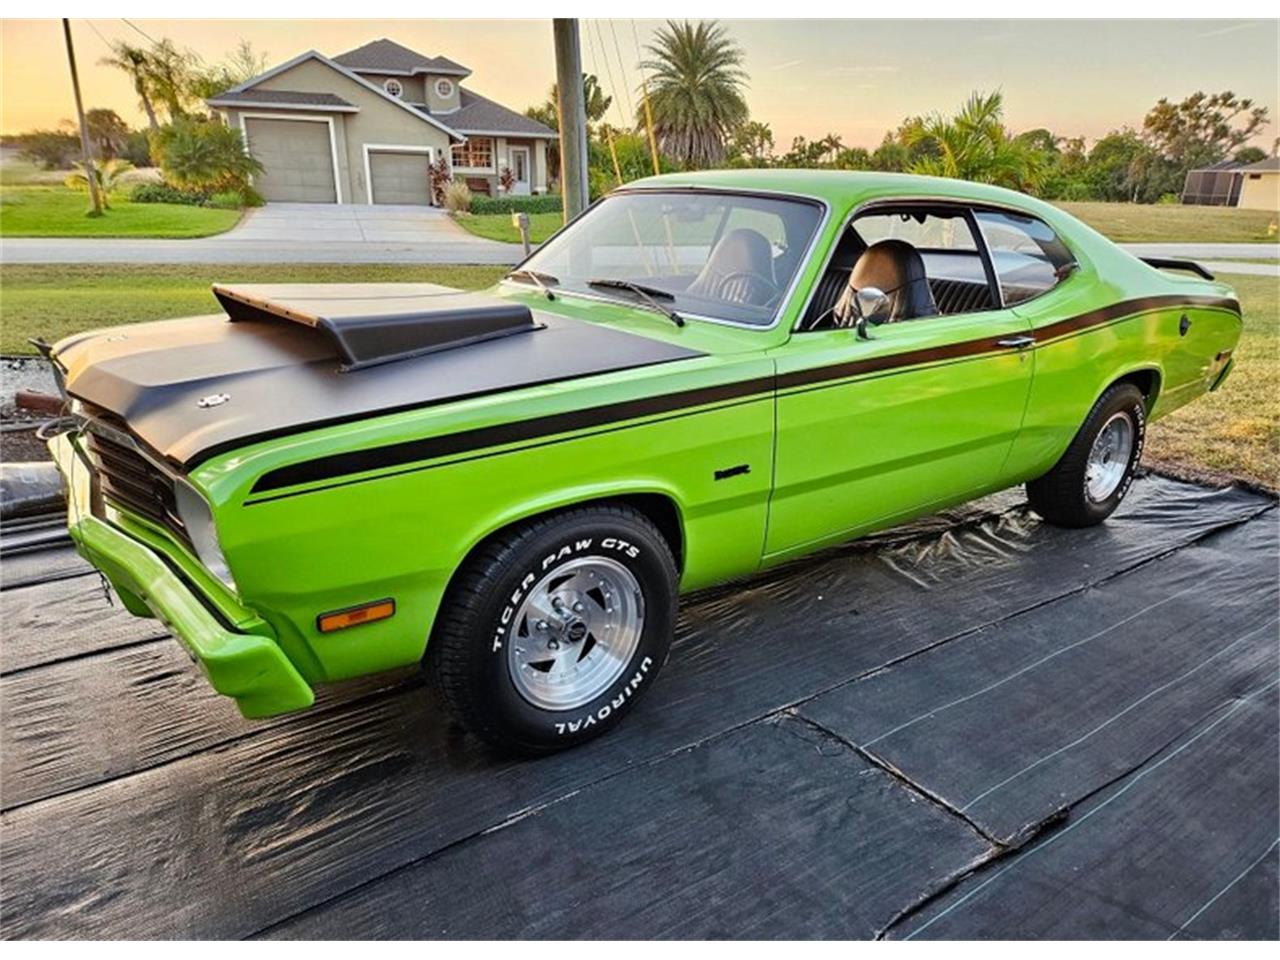 For Sale: 1973 Plymouth Duster in Dayton, Ohio for sale in Dayton, OH